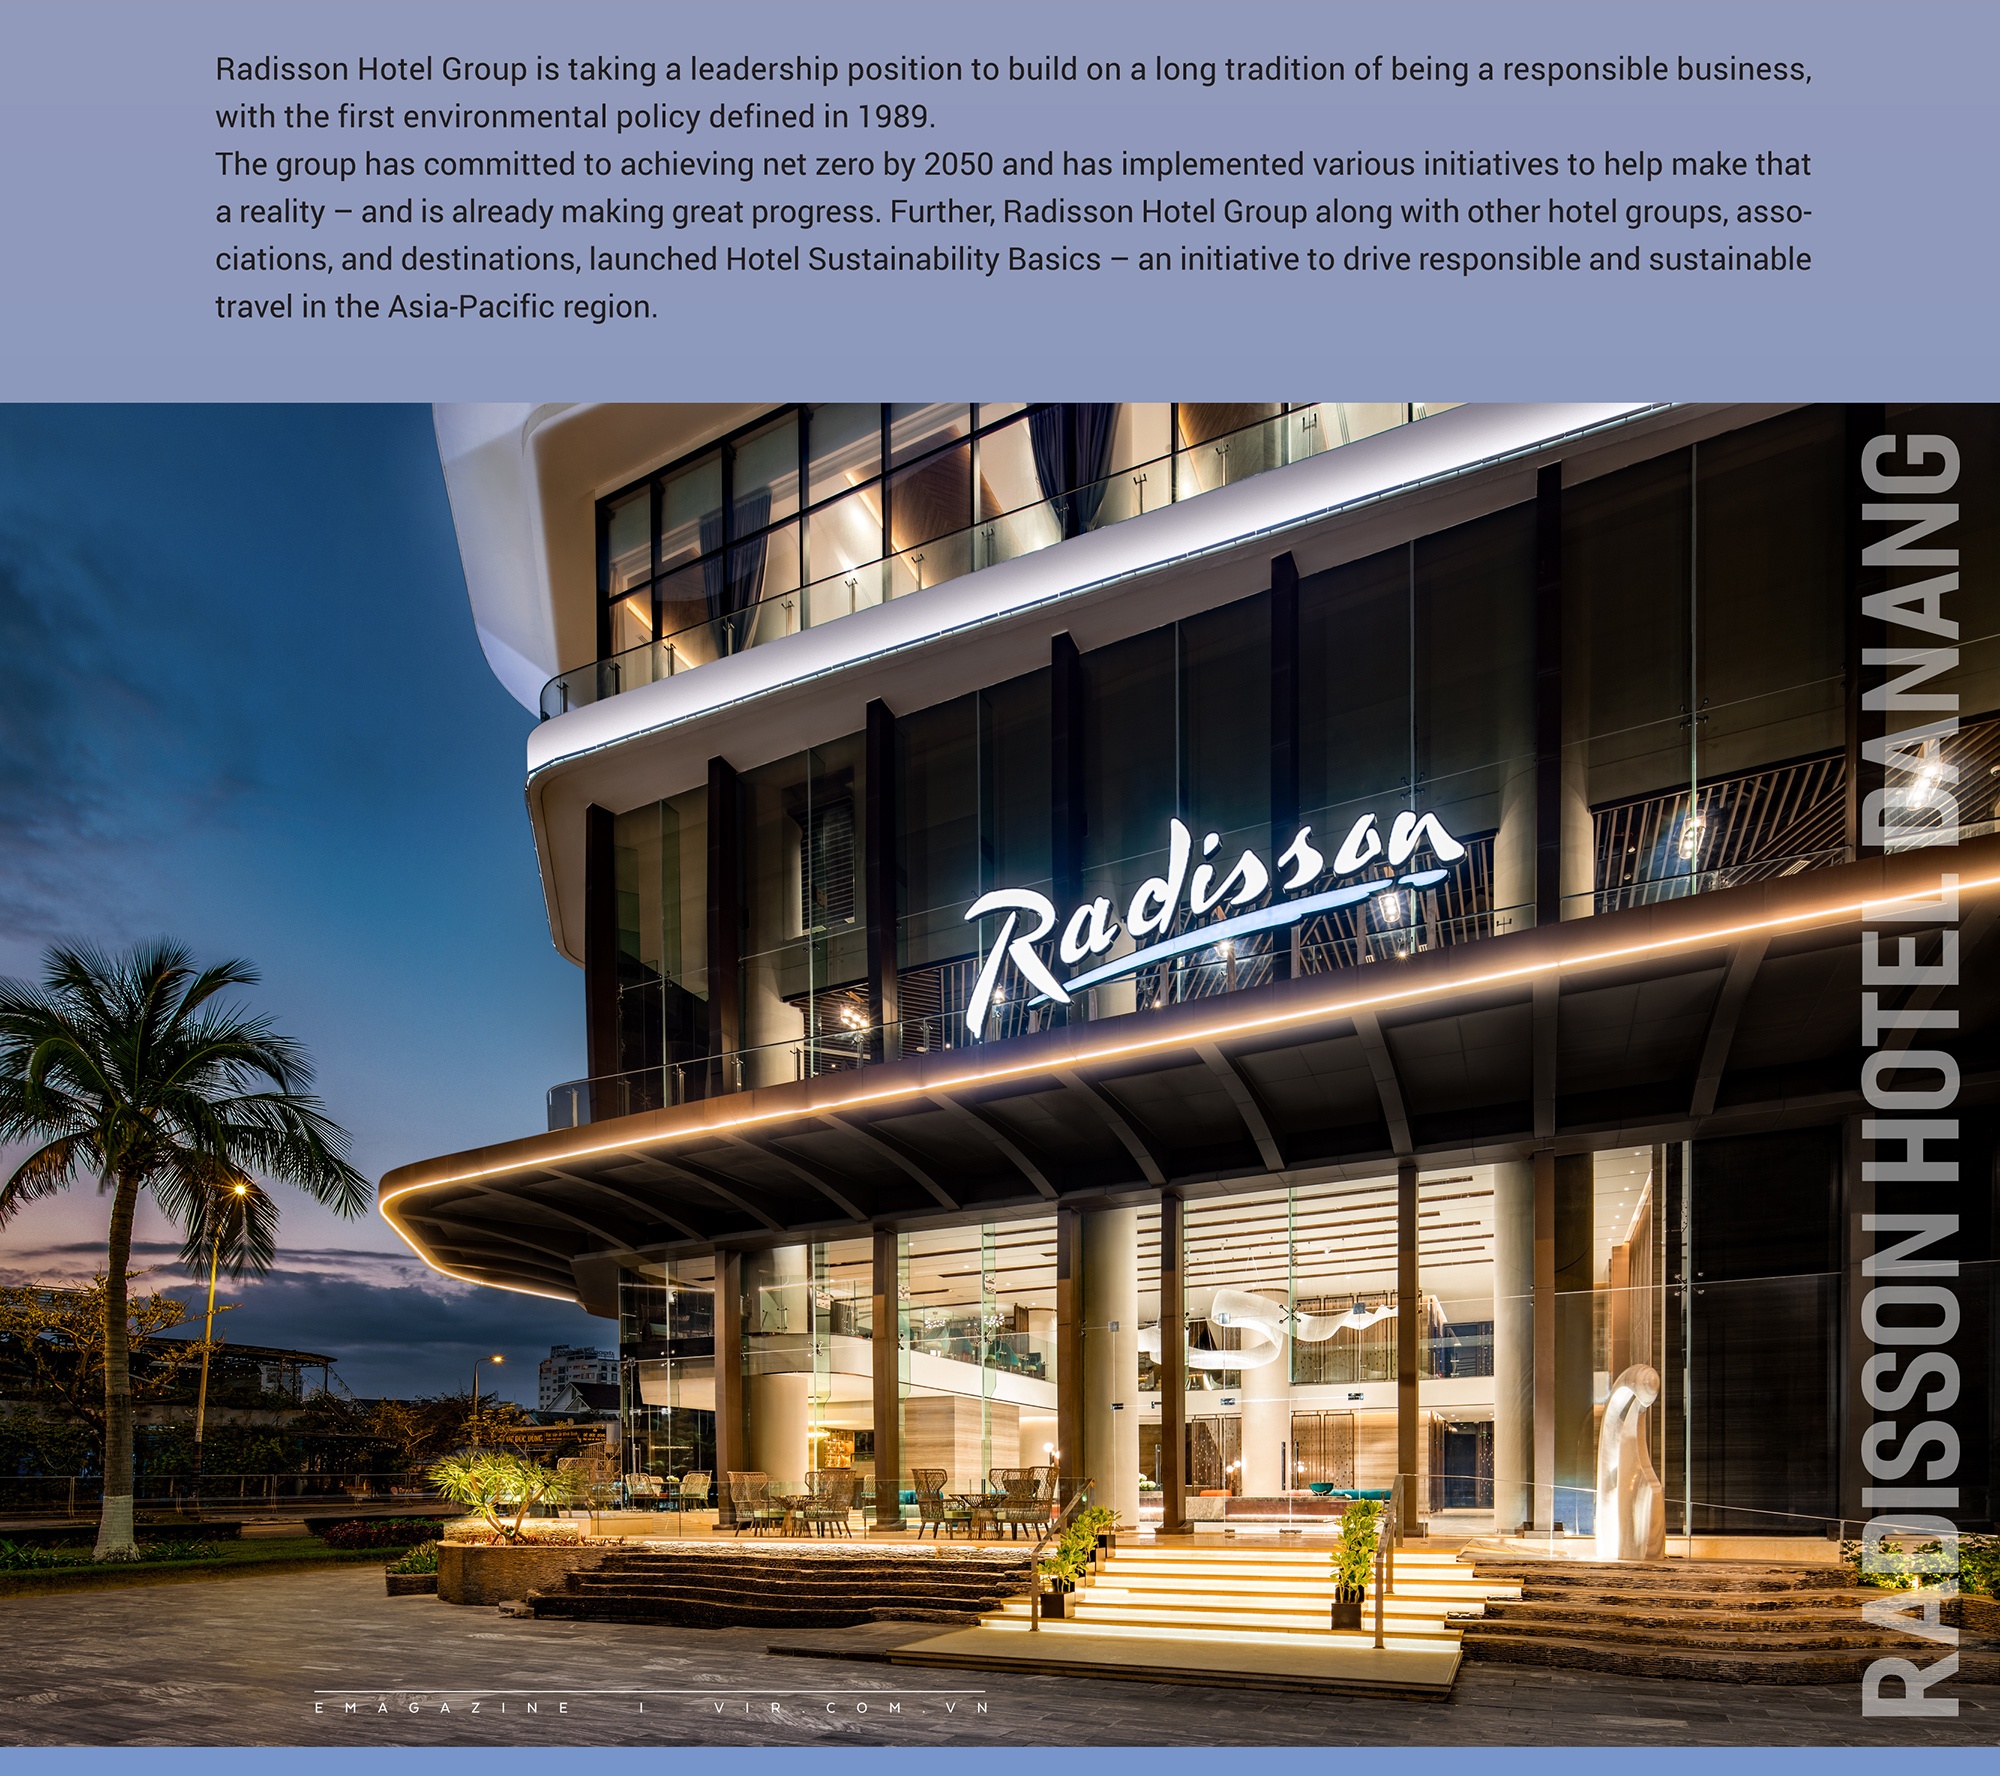 Radisson Hotel Group spearheading hospitality growth in Asia-Pacific